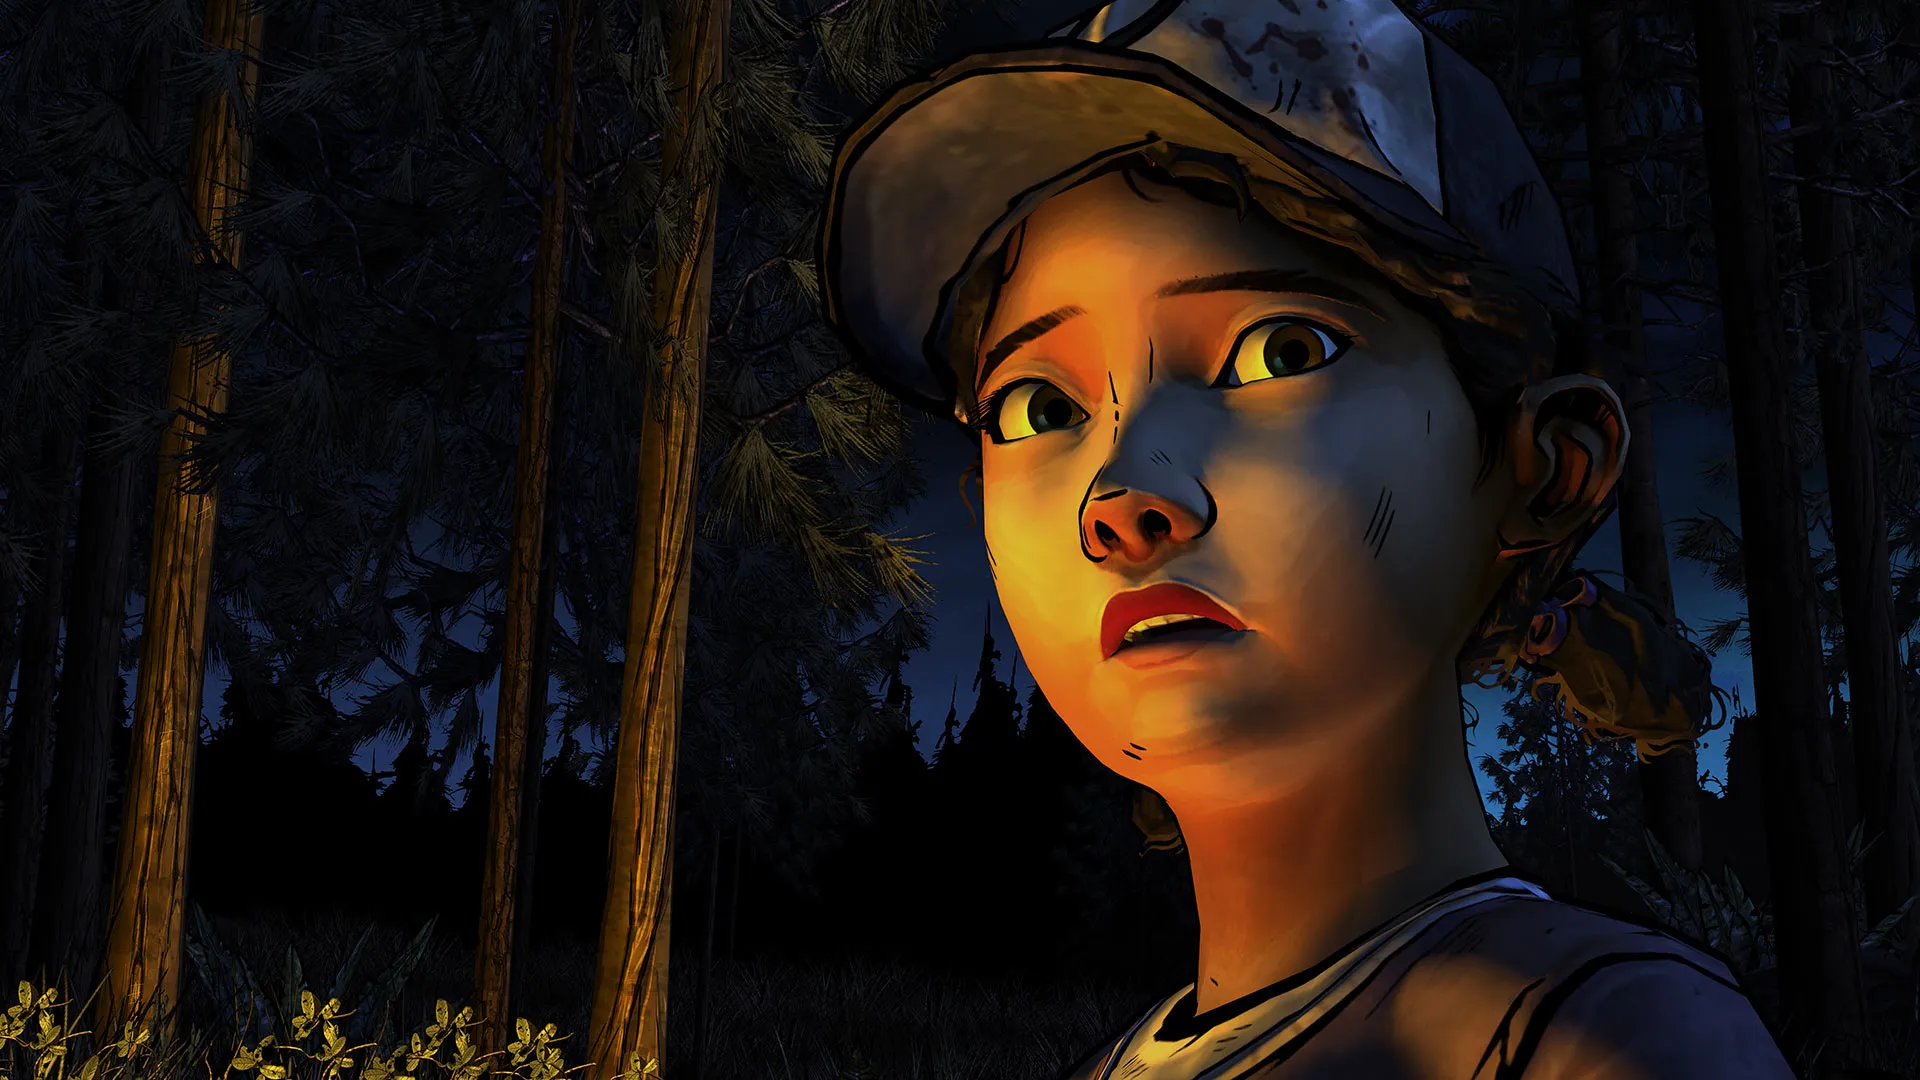 We're Getting More Clementine In The Walking Dead Game | The Mary Sue1920 x 1080